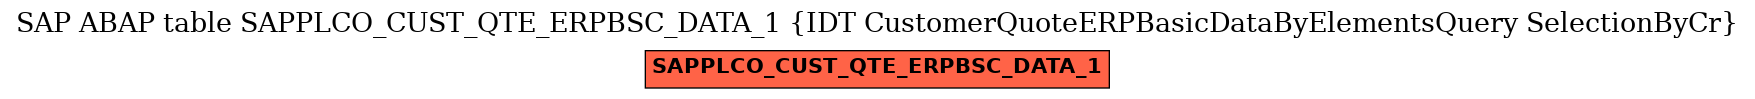 E-R Diagram for table SAPPLCO_CUST_QTE_ERPBSC_DATA_1 (IDT CustomerQuoteERPBasicDataByElementsQuery SelectionByCr)